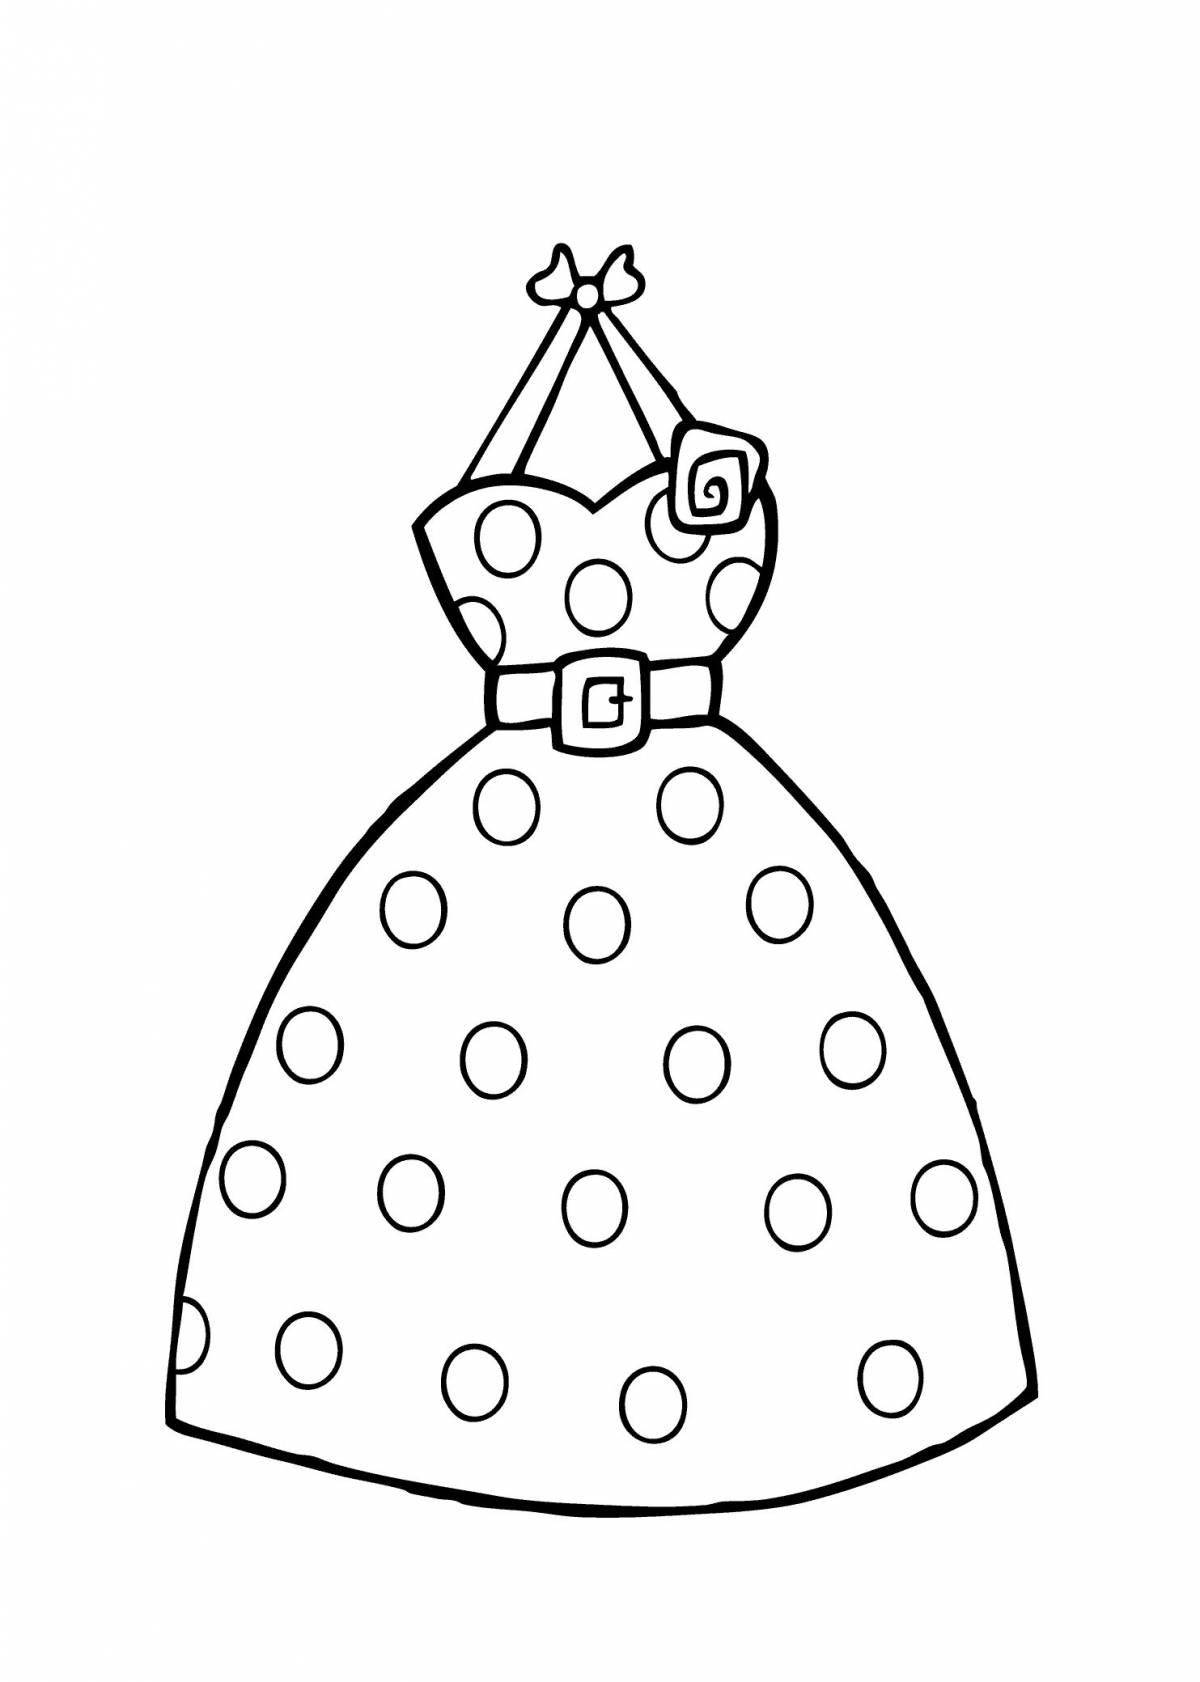 Glamorous dress coloring page for children 5-6 years old